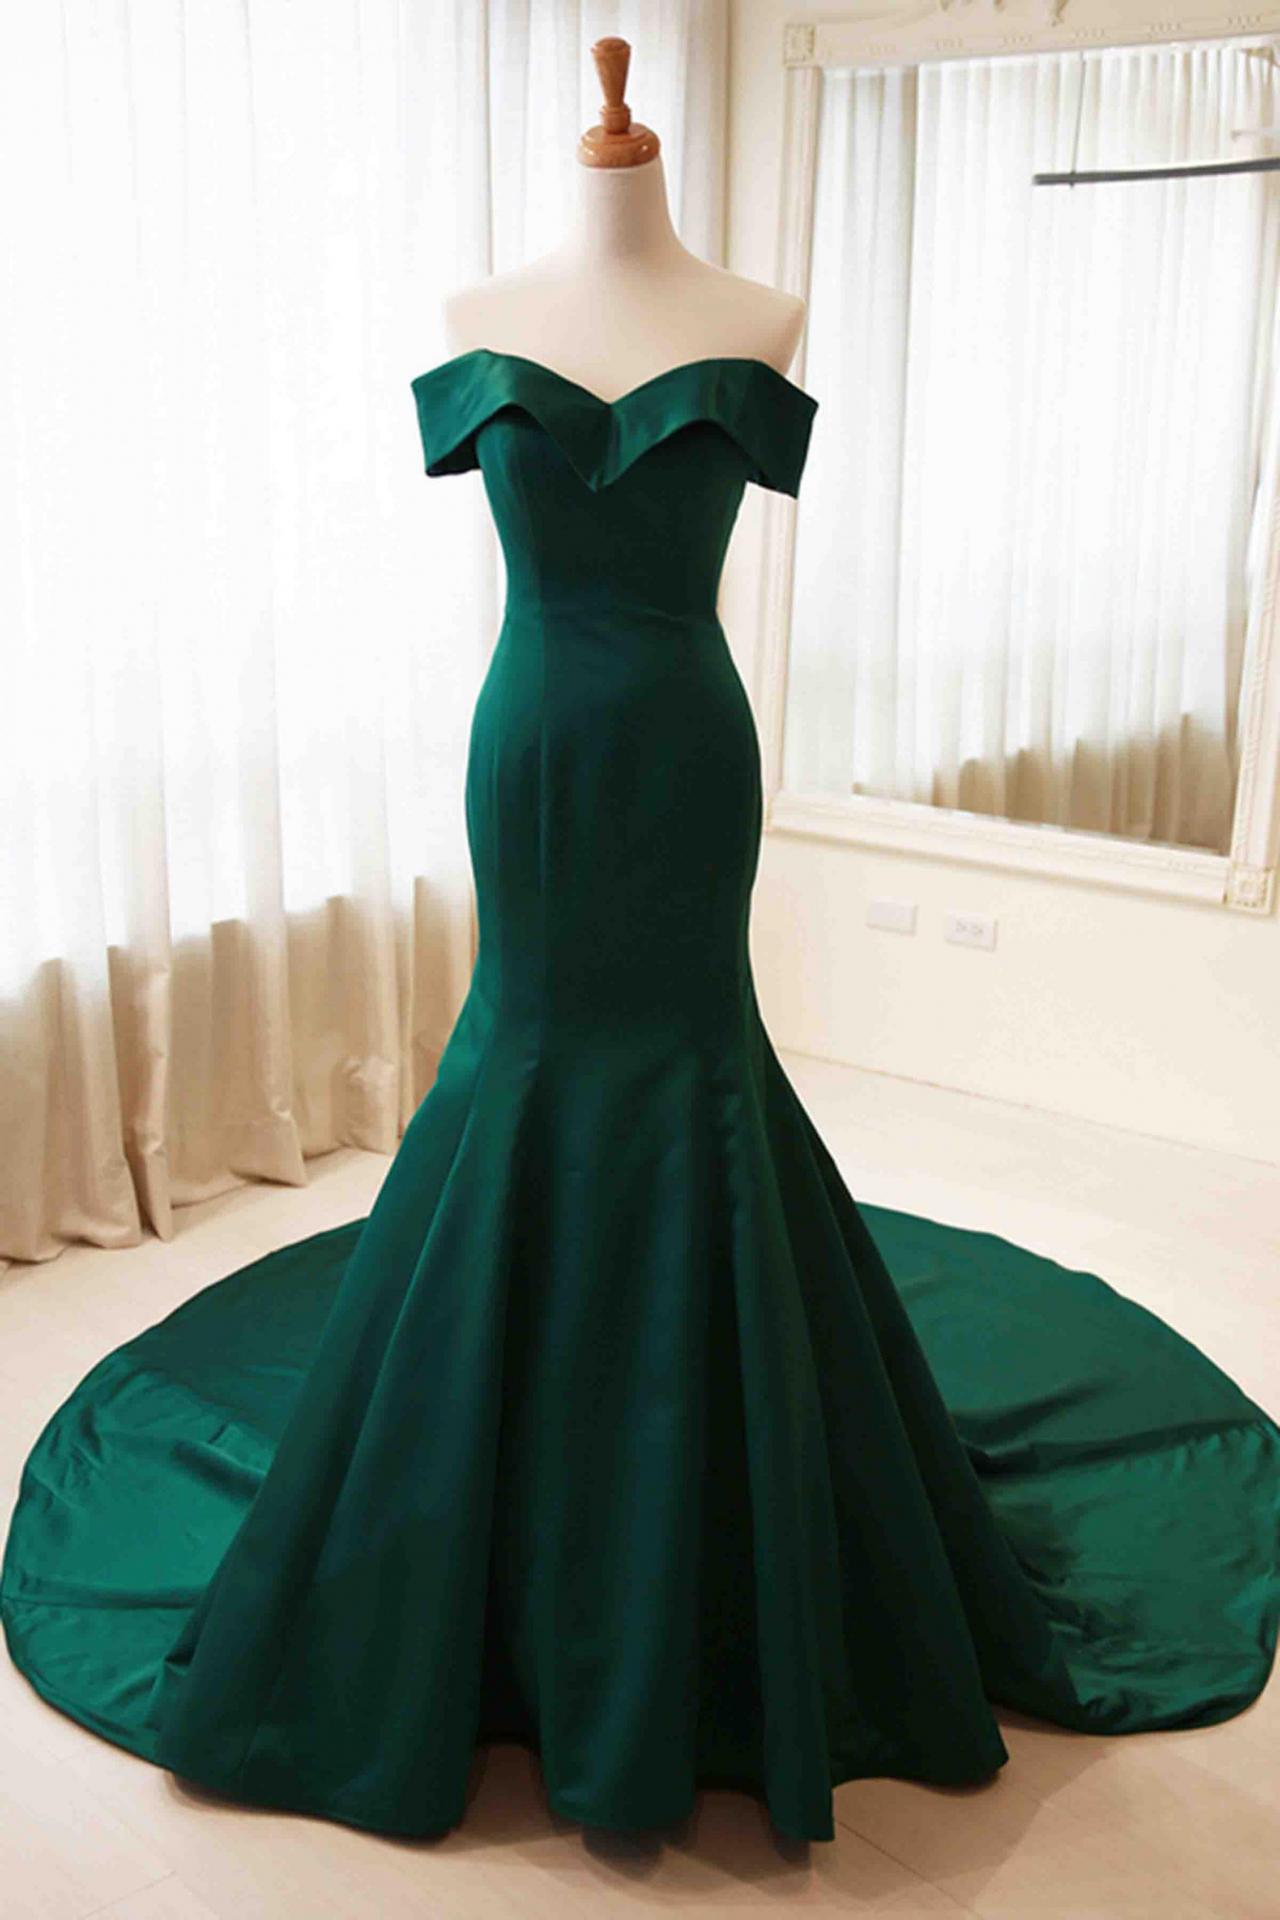 Sexy Long Off The Shoulder Prom Dress Evening With Bow Dress Party Dress Bridesmaid Dress Wedding Occasion Dress Formal Occasion Dress